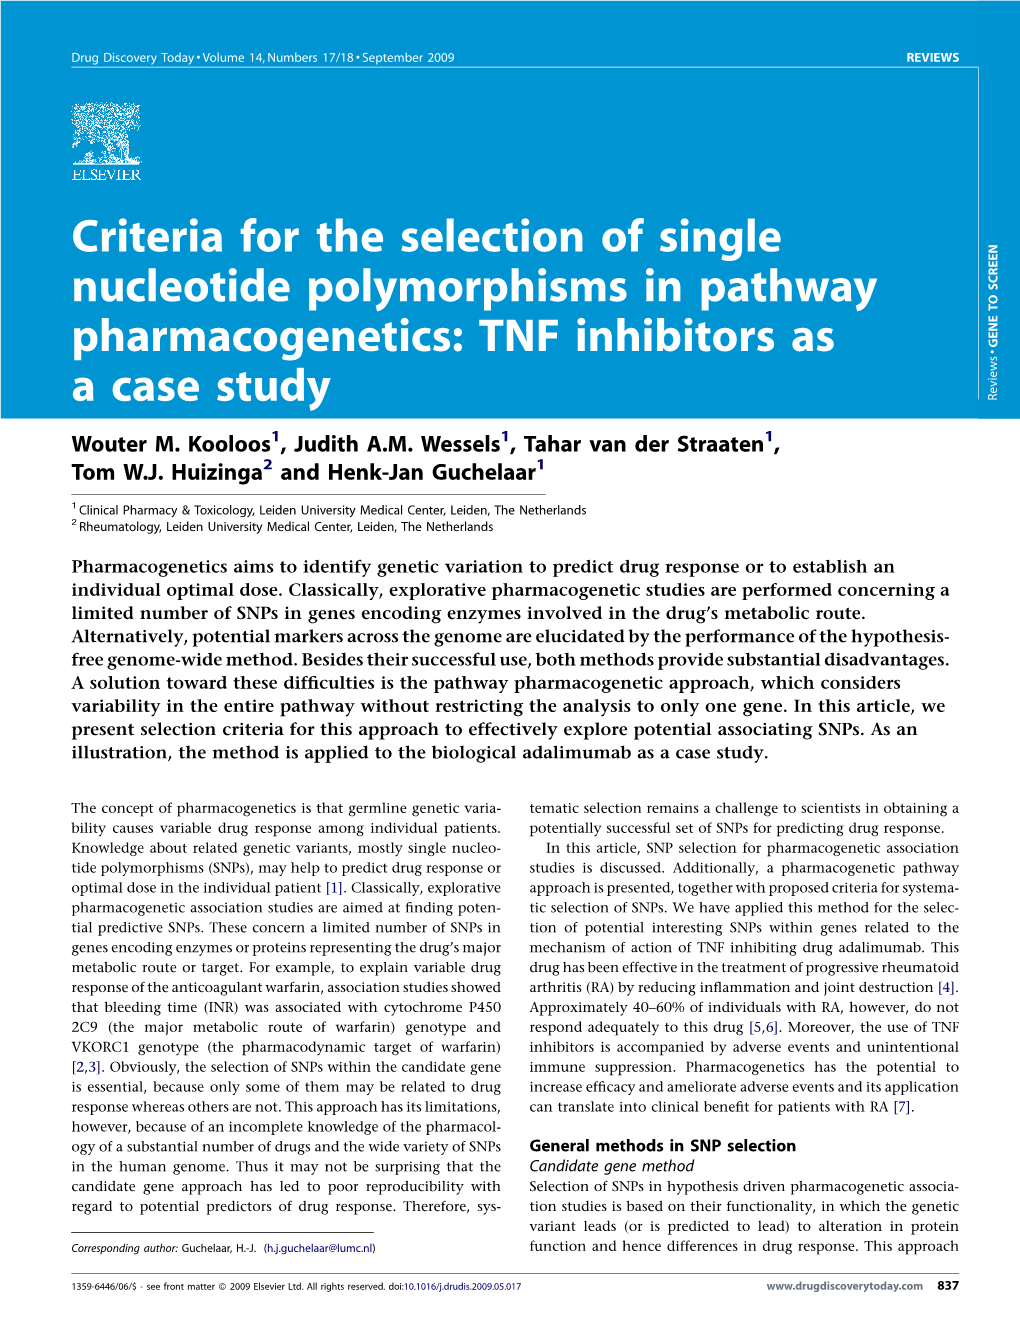 TNF Inhibitors As a Case Study